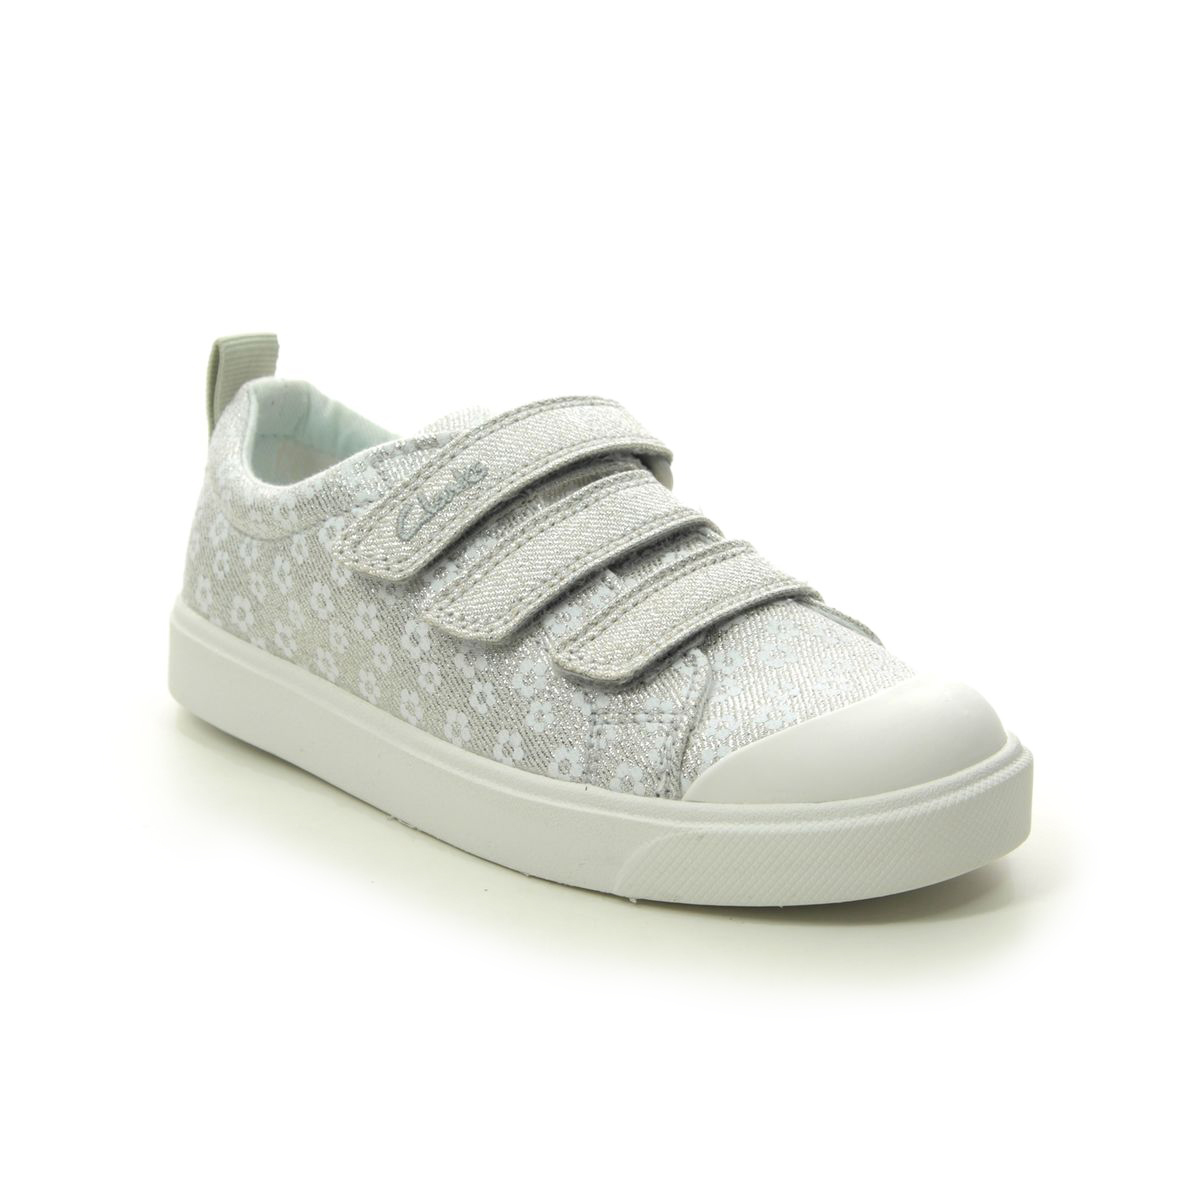 Clarks City Vibe K Silver Kids girls trainers 4910-96F